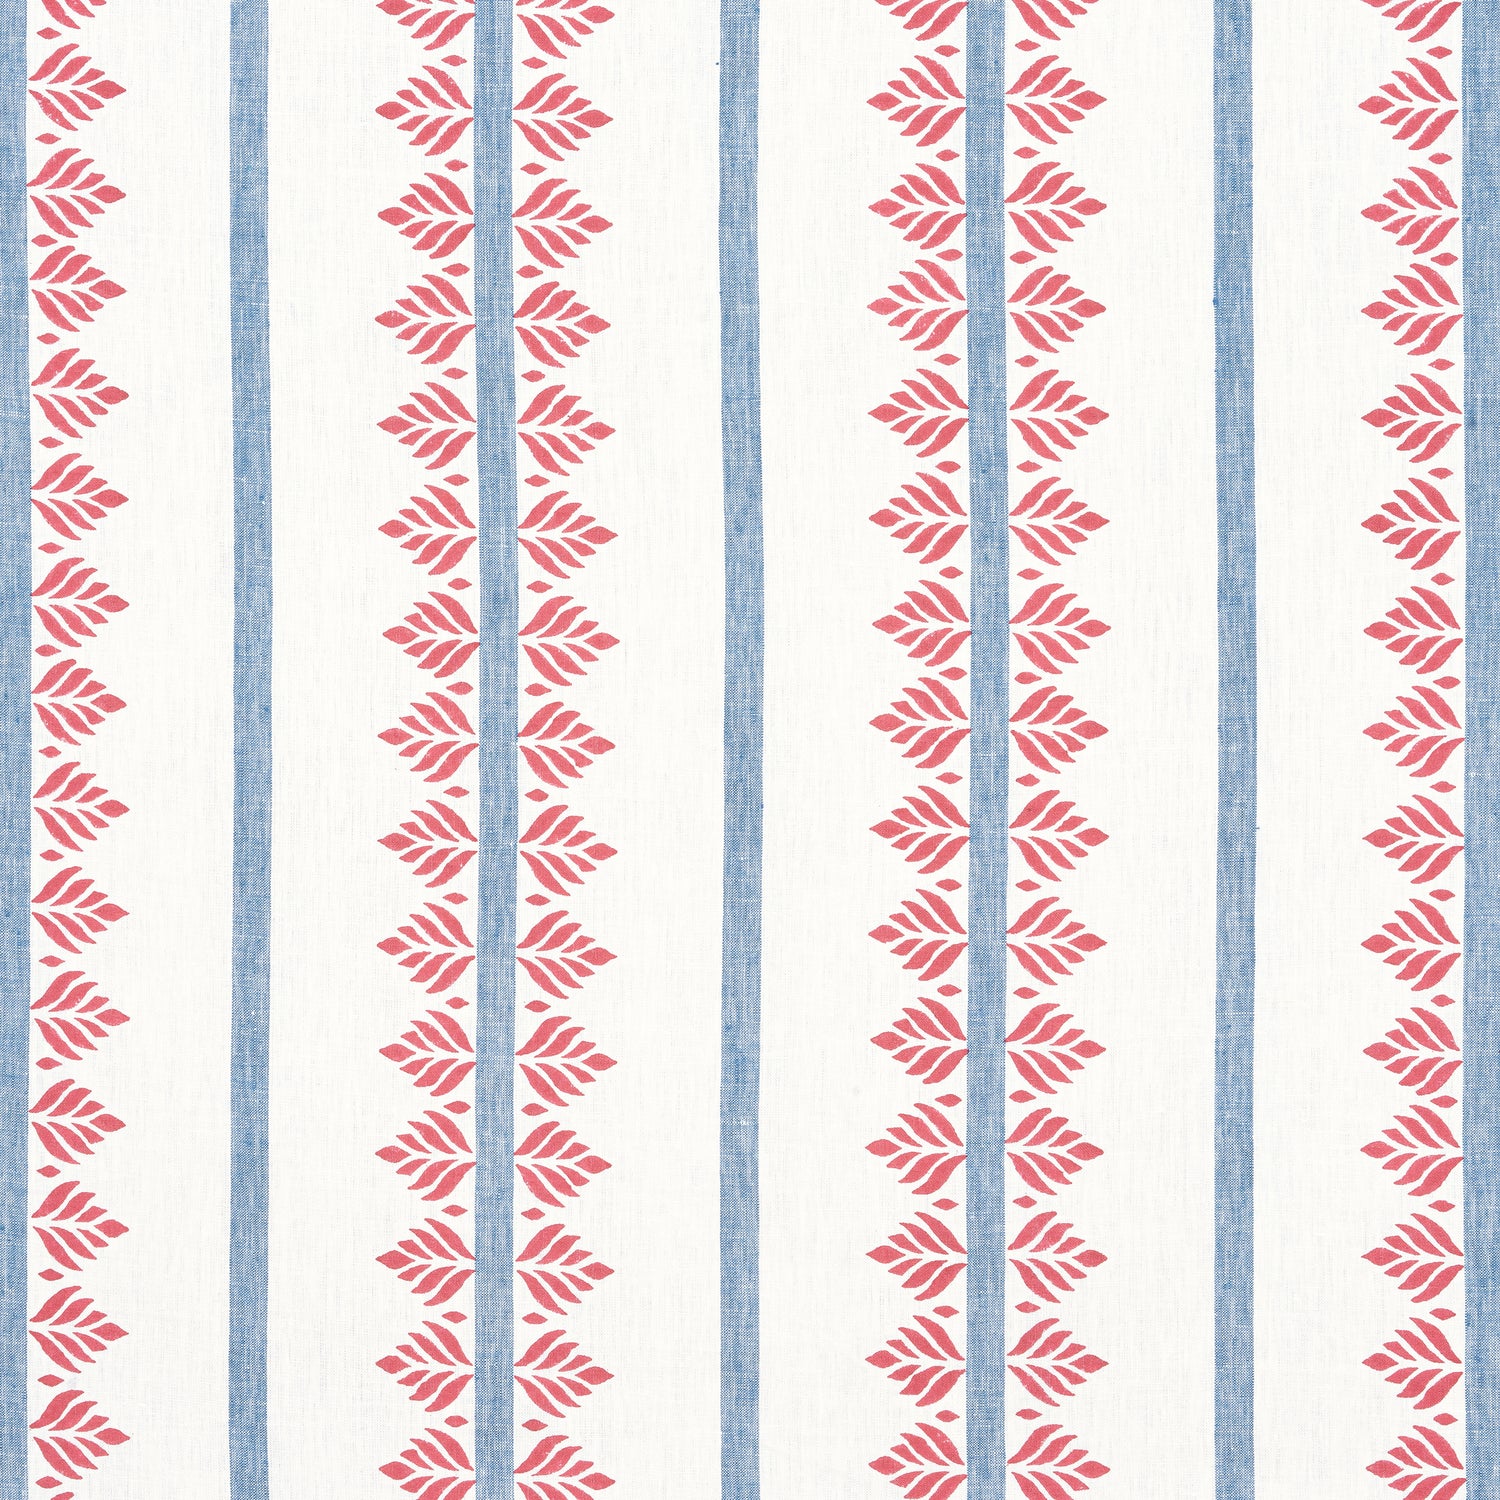 Fern Stripe fabric in red and blue color - pattern number AF15105 - by Anna French in the Antilles collection